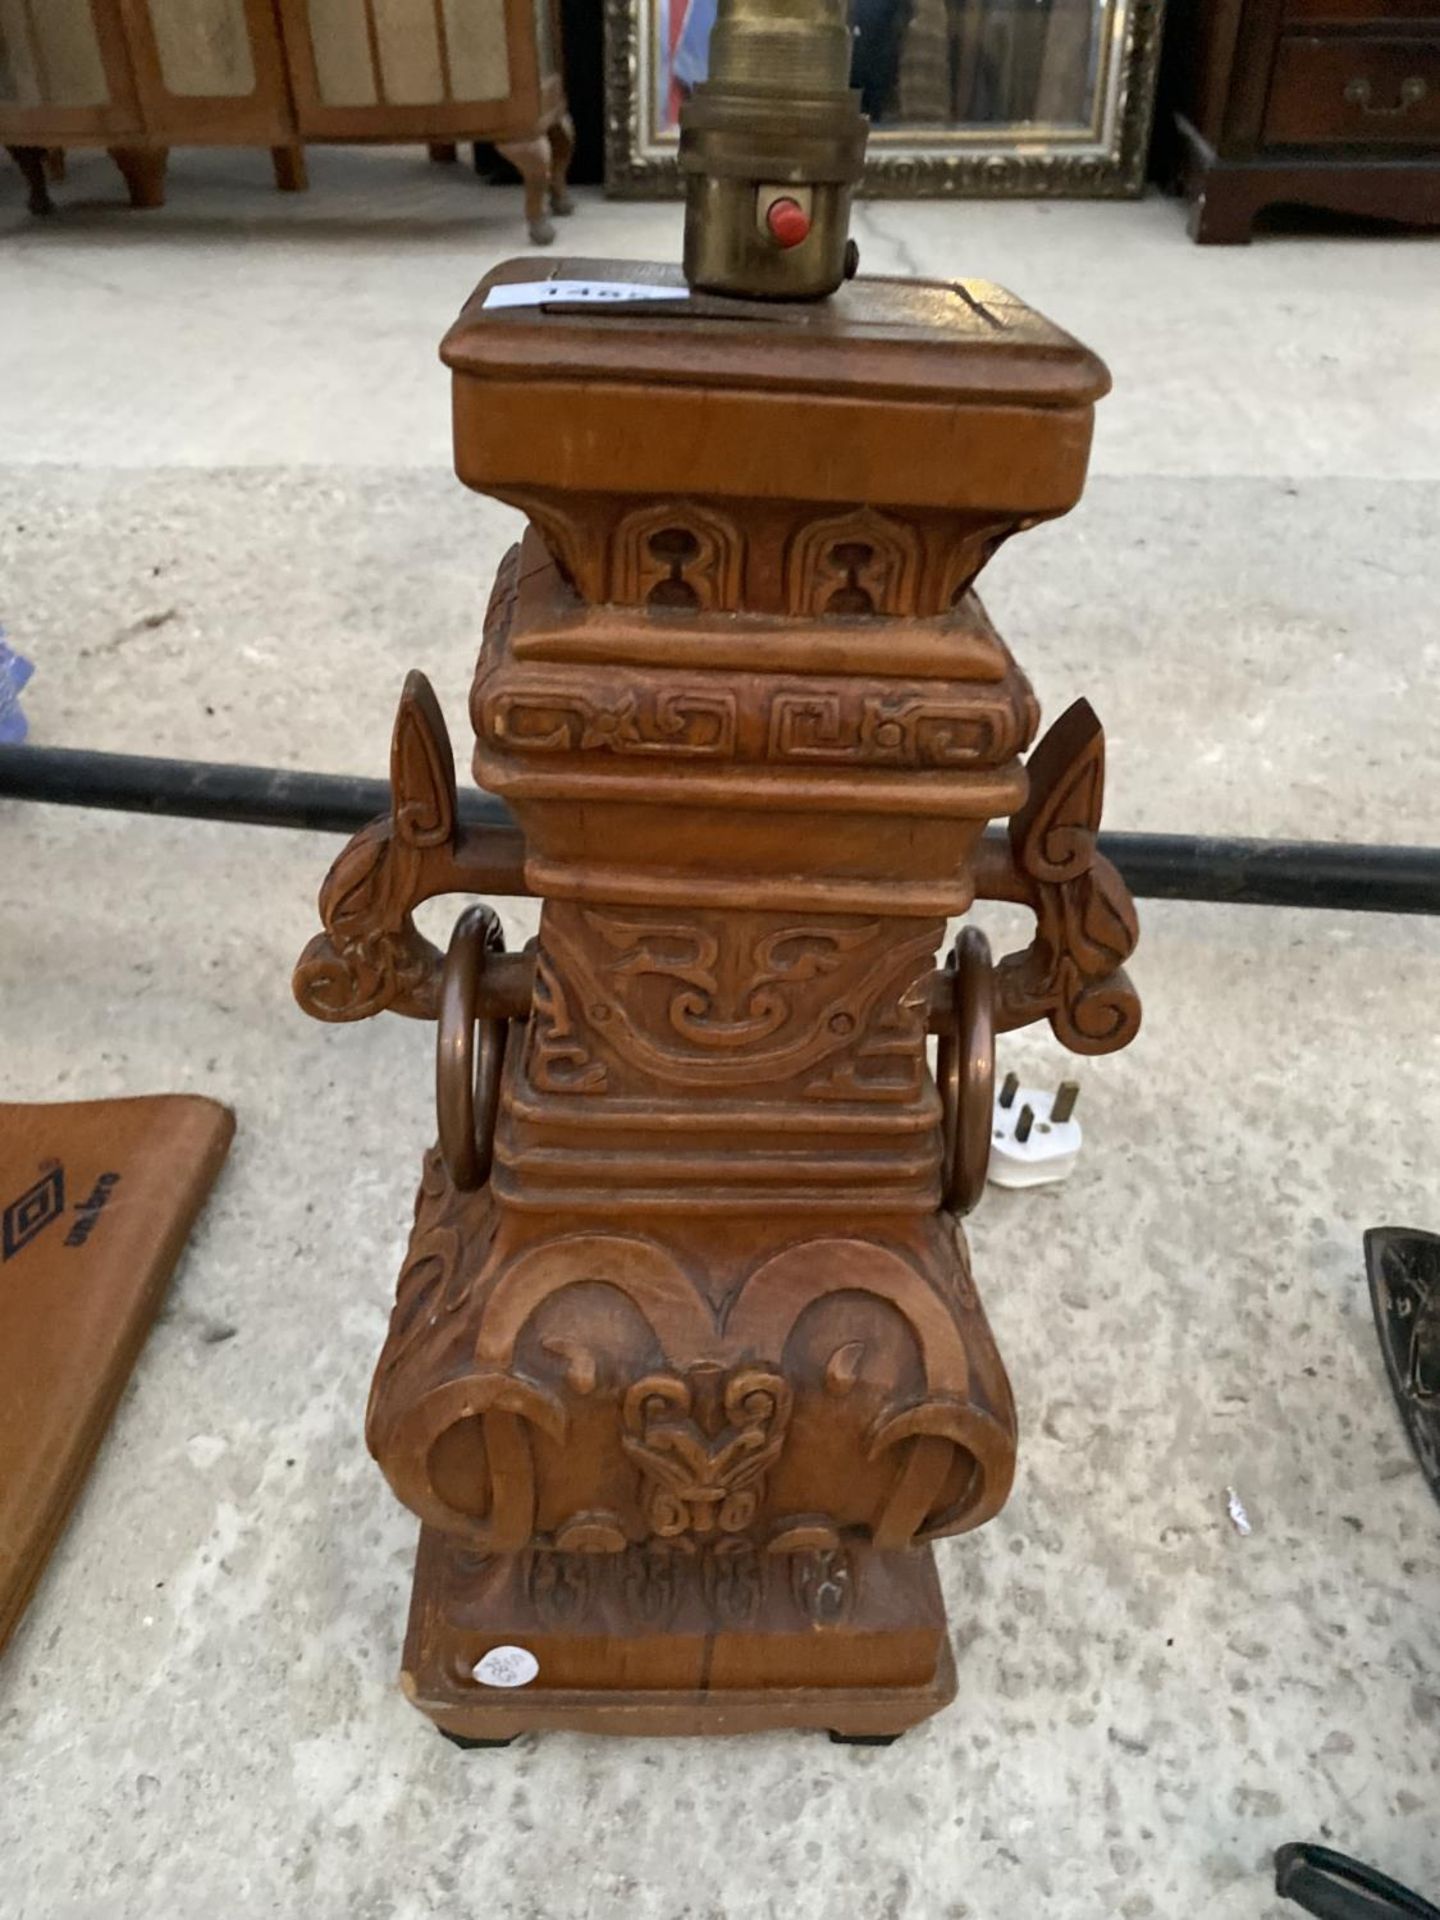 A DECORATIVE CARVE TREEN TABLE LAMP